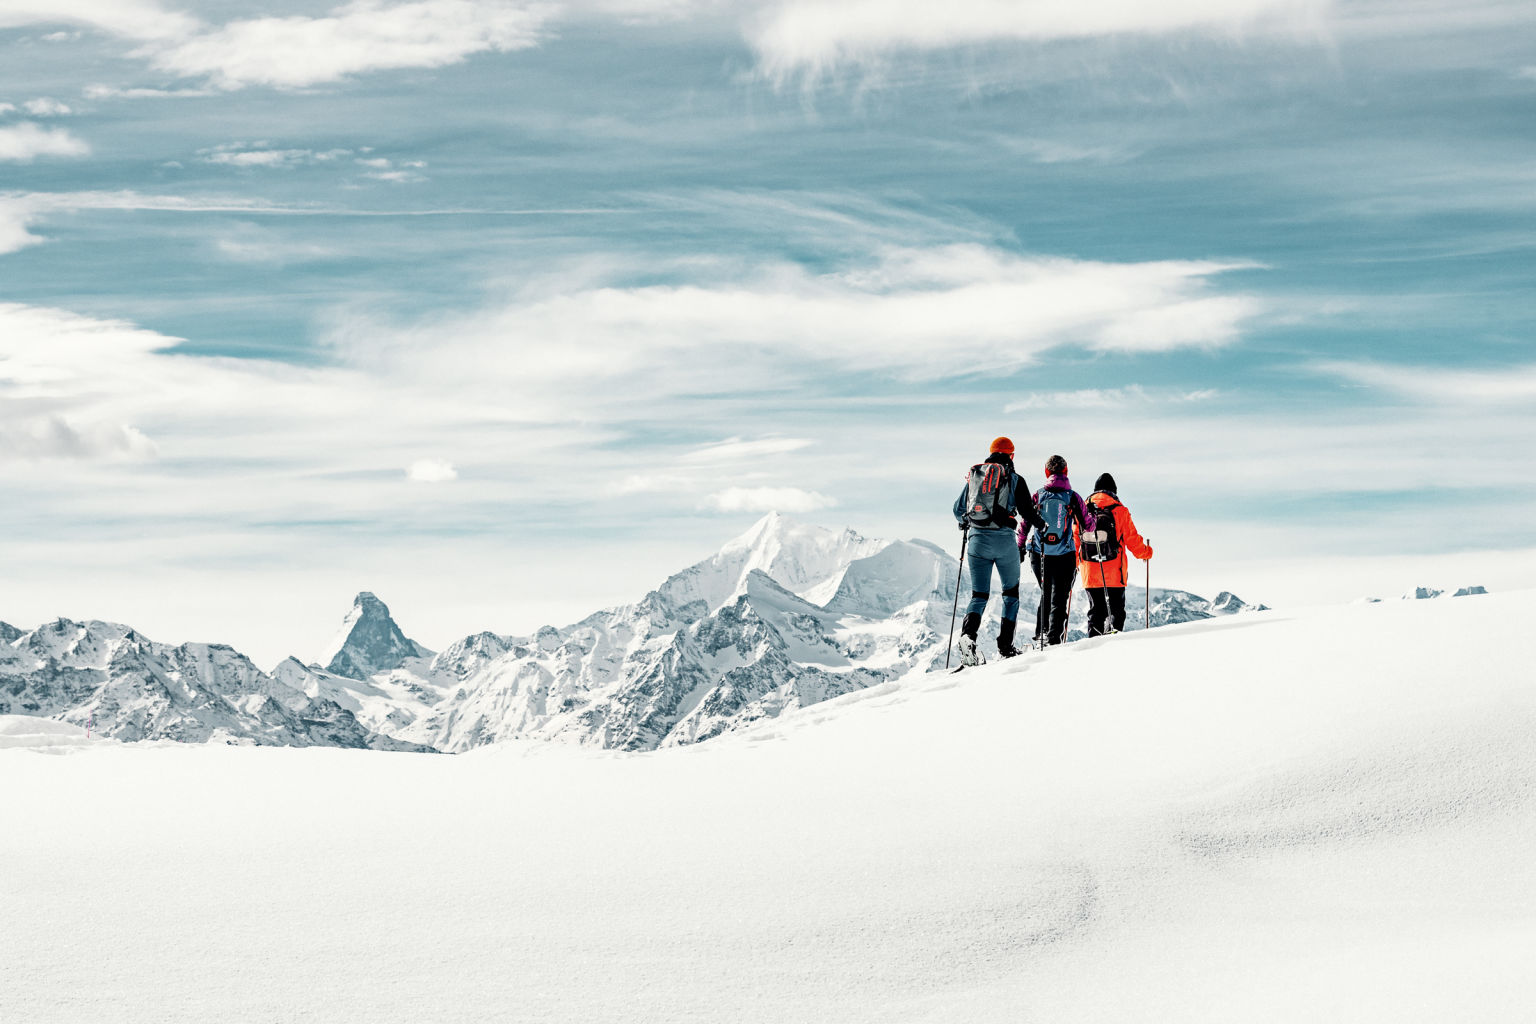 "Like dancing in the sky": For Ed, snowshoeing is more than a physically healthy winter sport, Valais, Switzerland